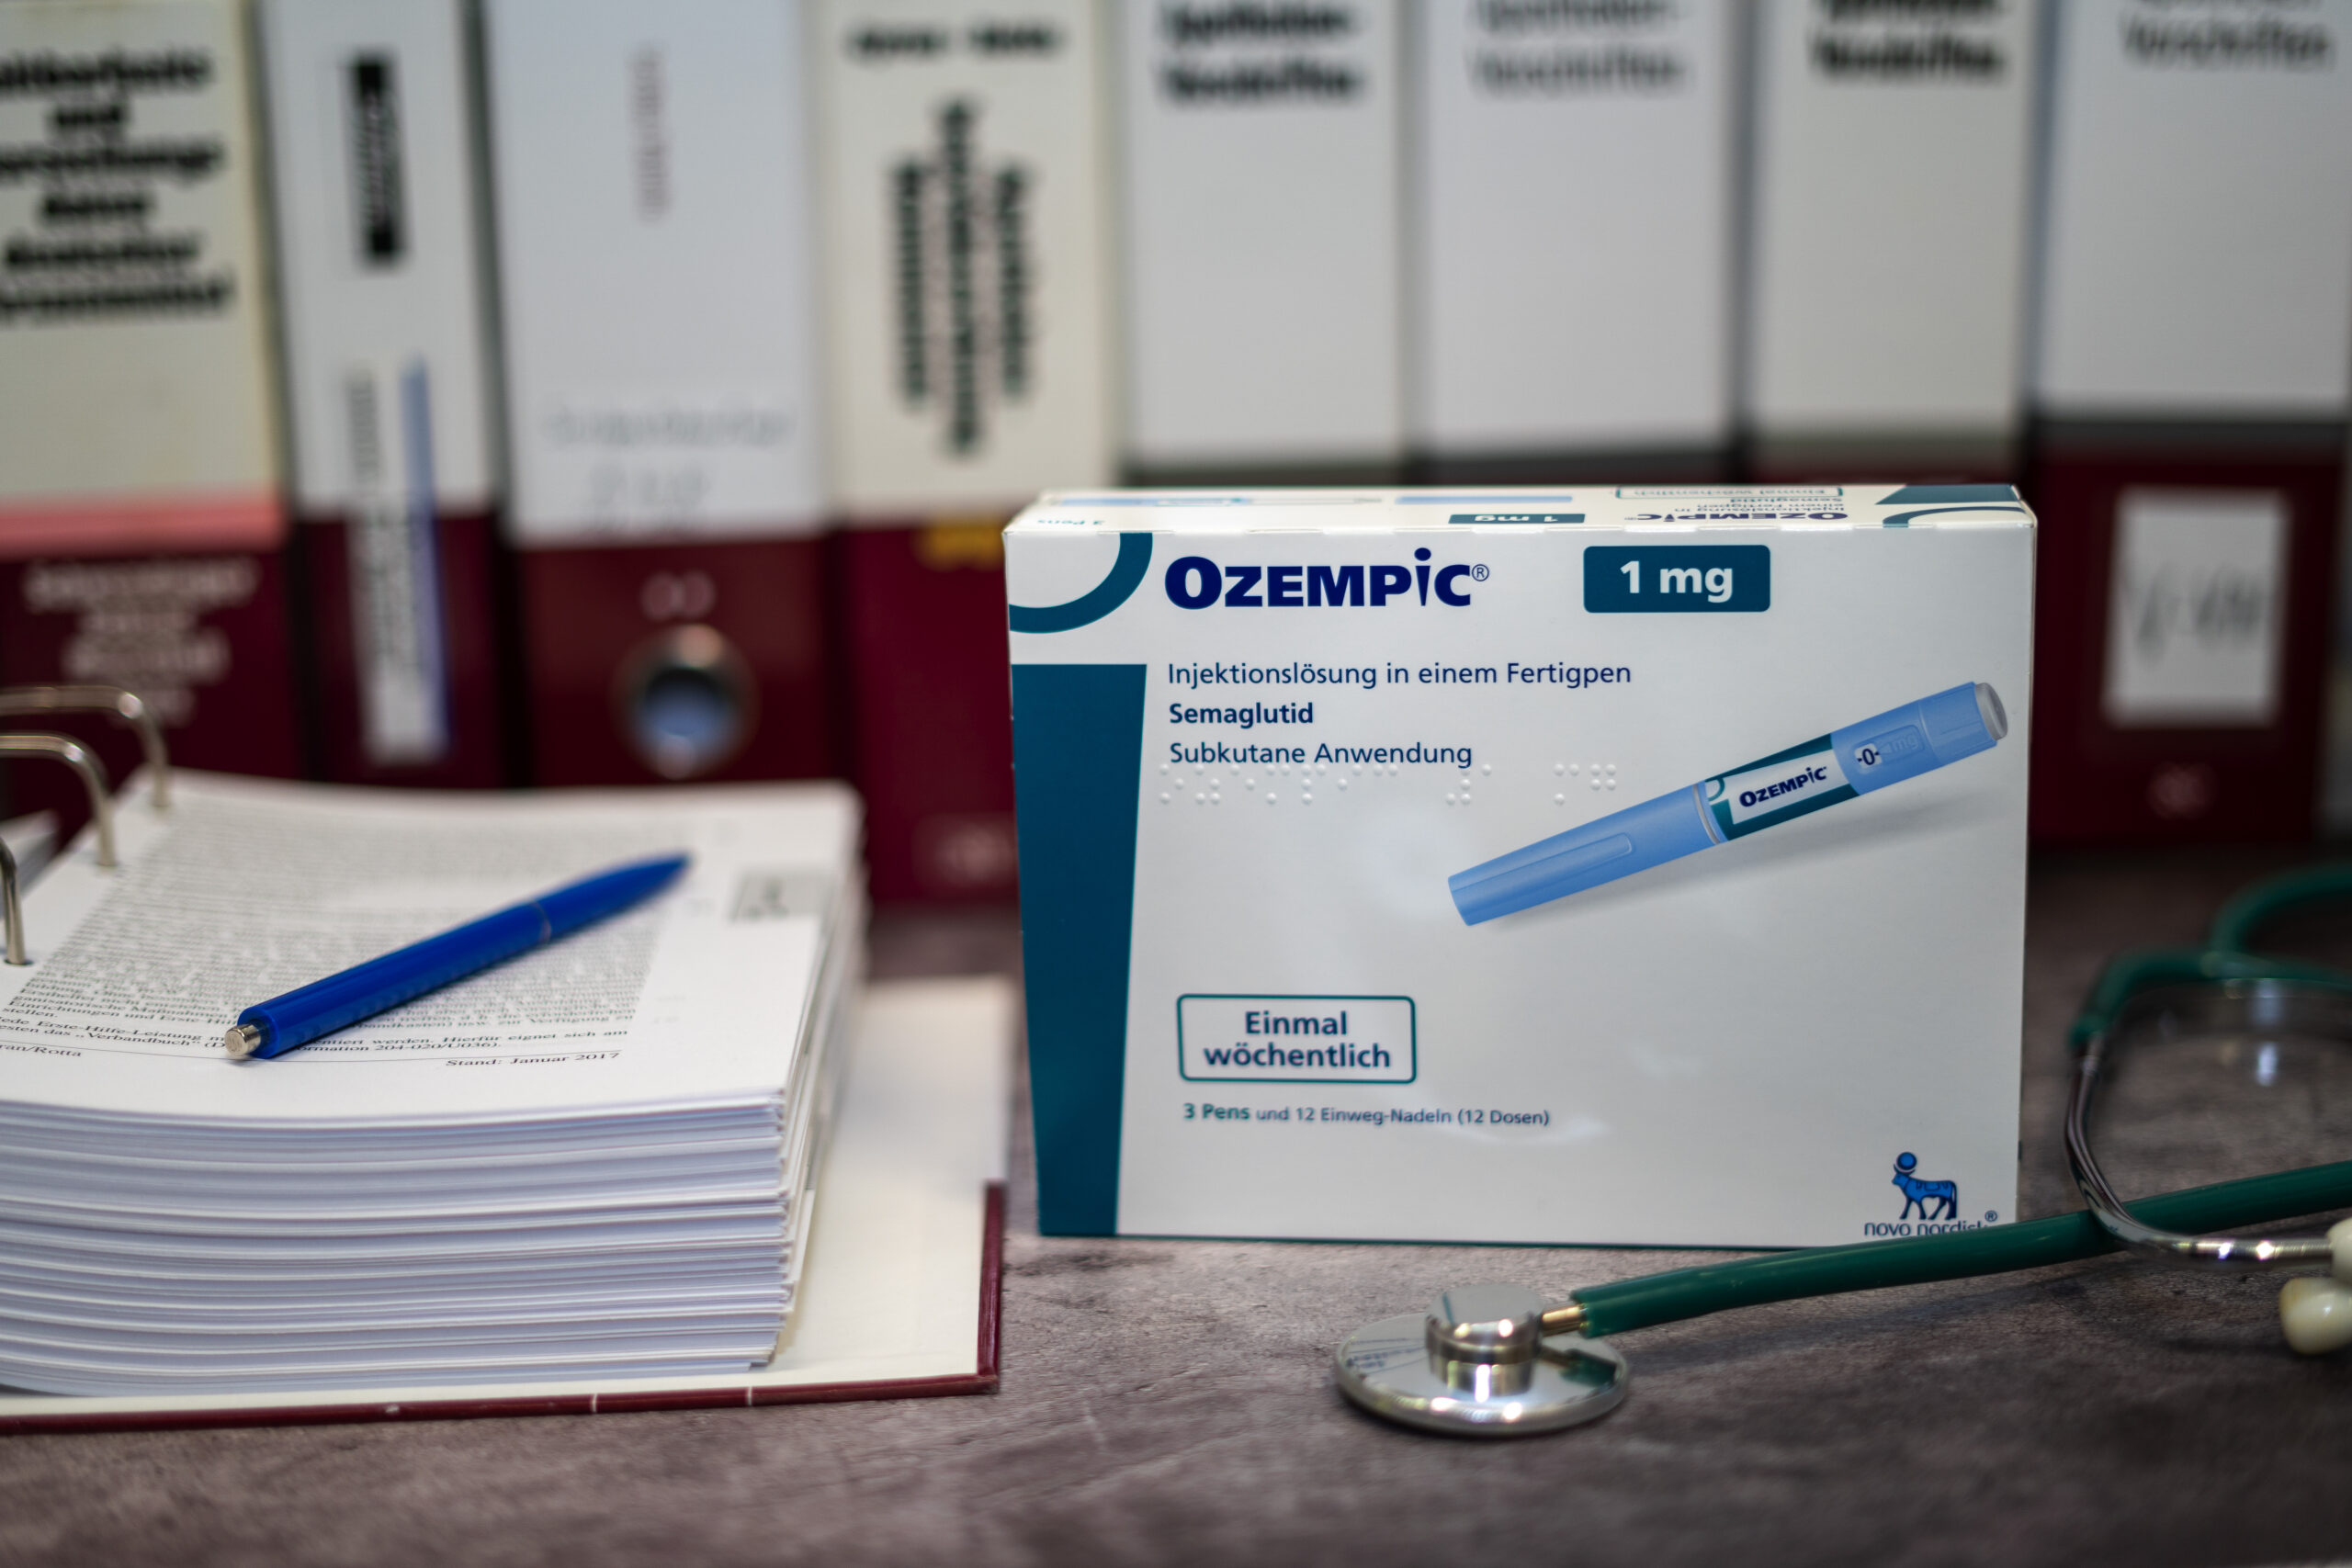 a drug box of ozempic containing semaglutide for treatment of t